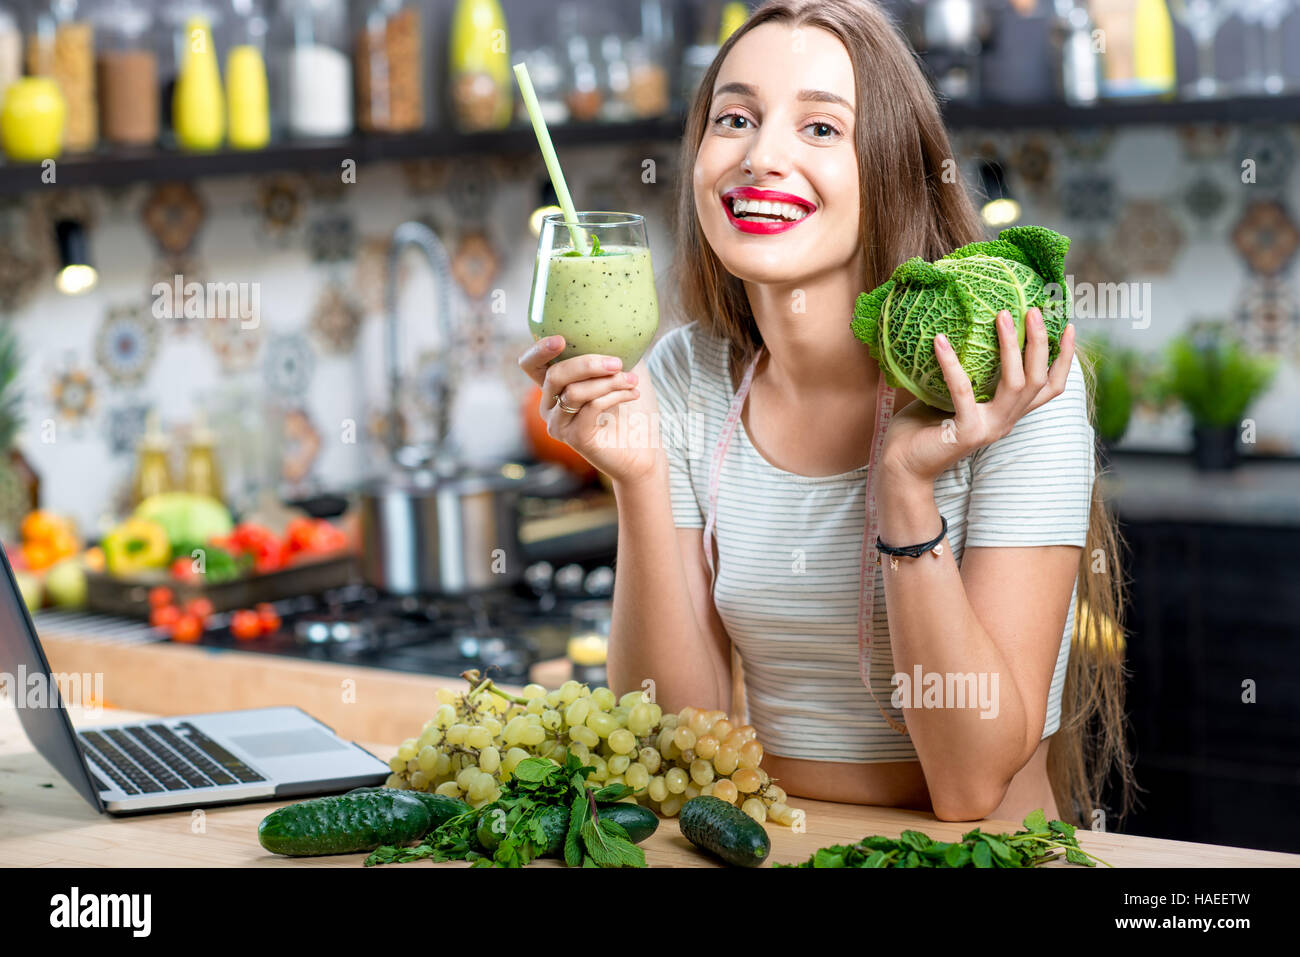 Woman with green smoothie Stock Photo